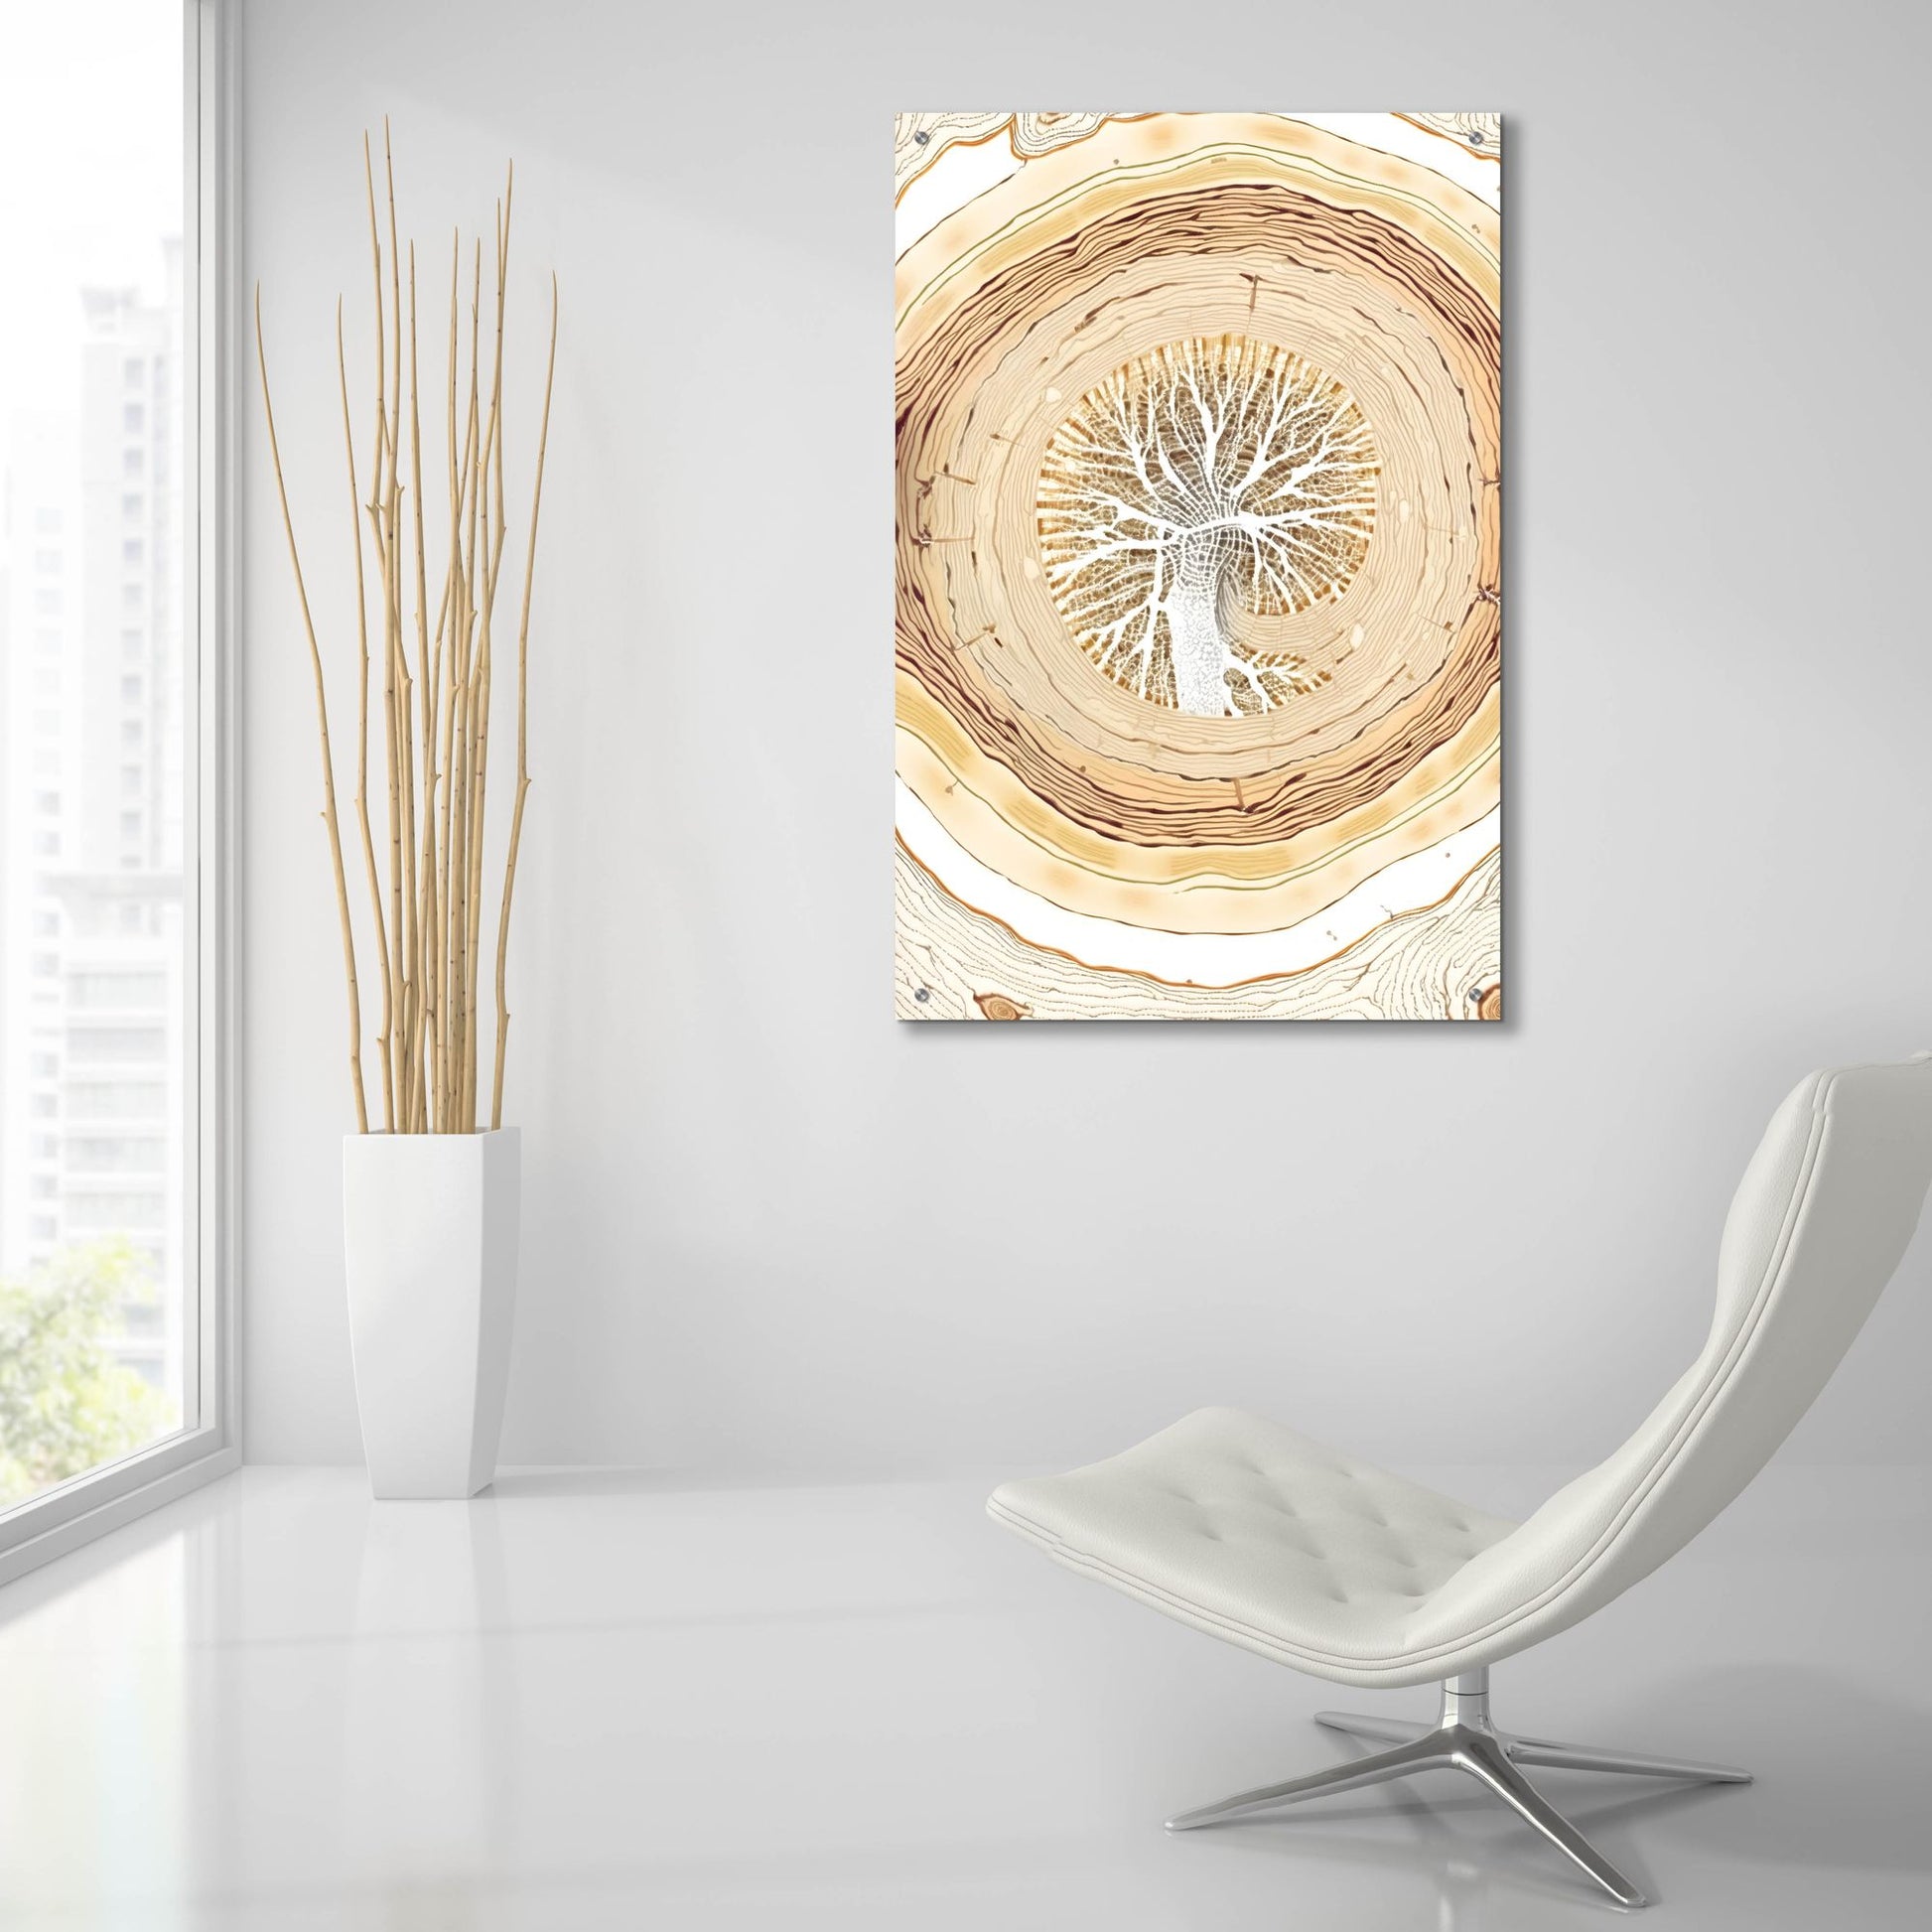 Epic Art 'Nature Inspired 24' by Petals Prints Design, Acrylic Glass Wall Art,24x36